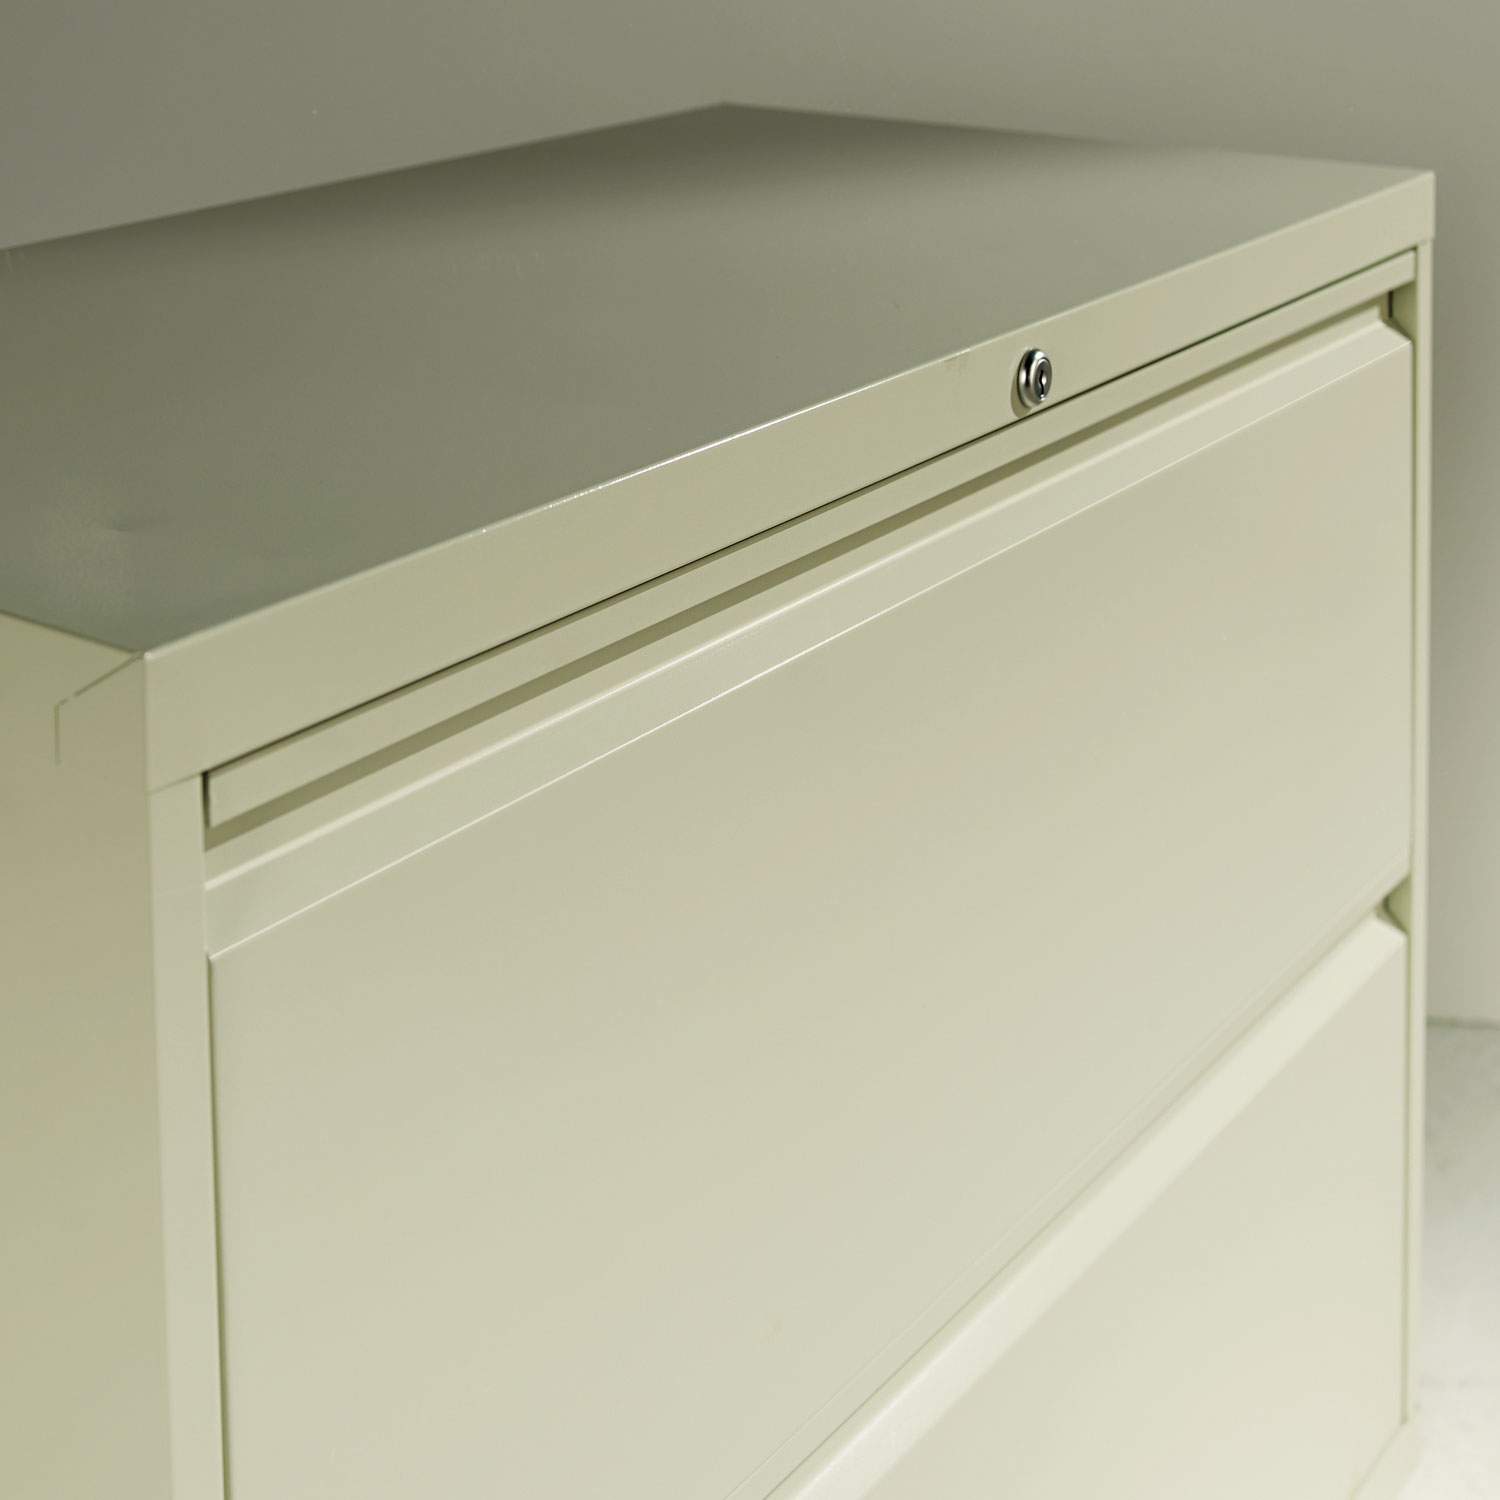 Four-Drawer Lateral File Cabinet, 30w x 18d x 52 1/2h, Light Gray